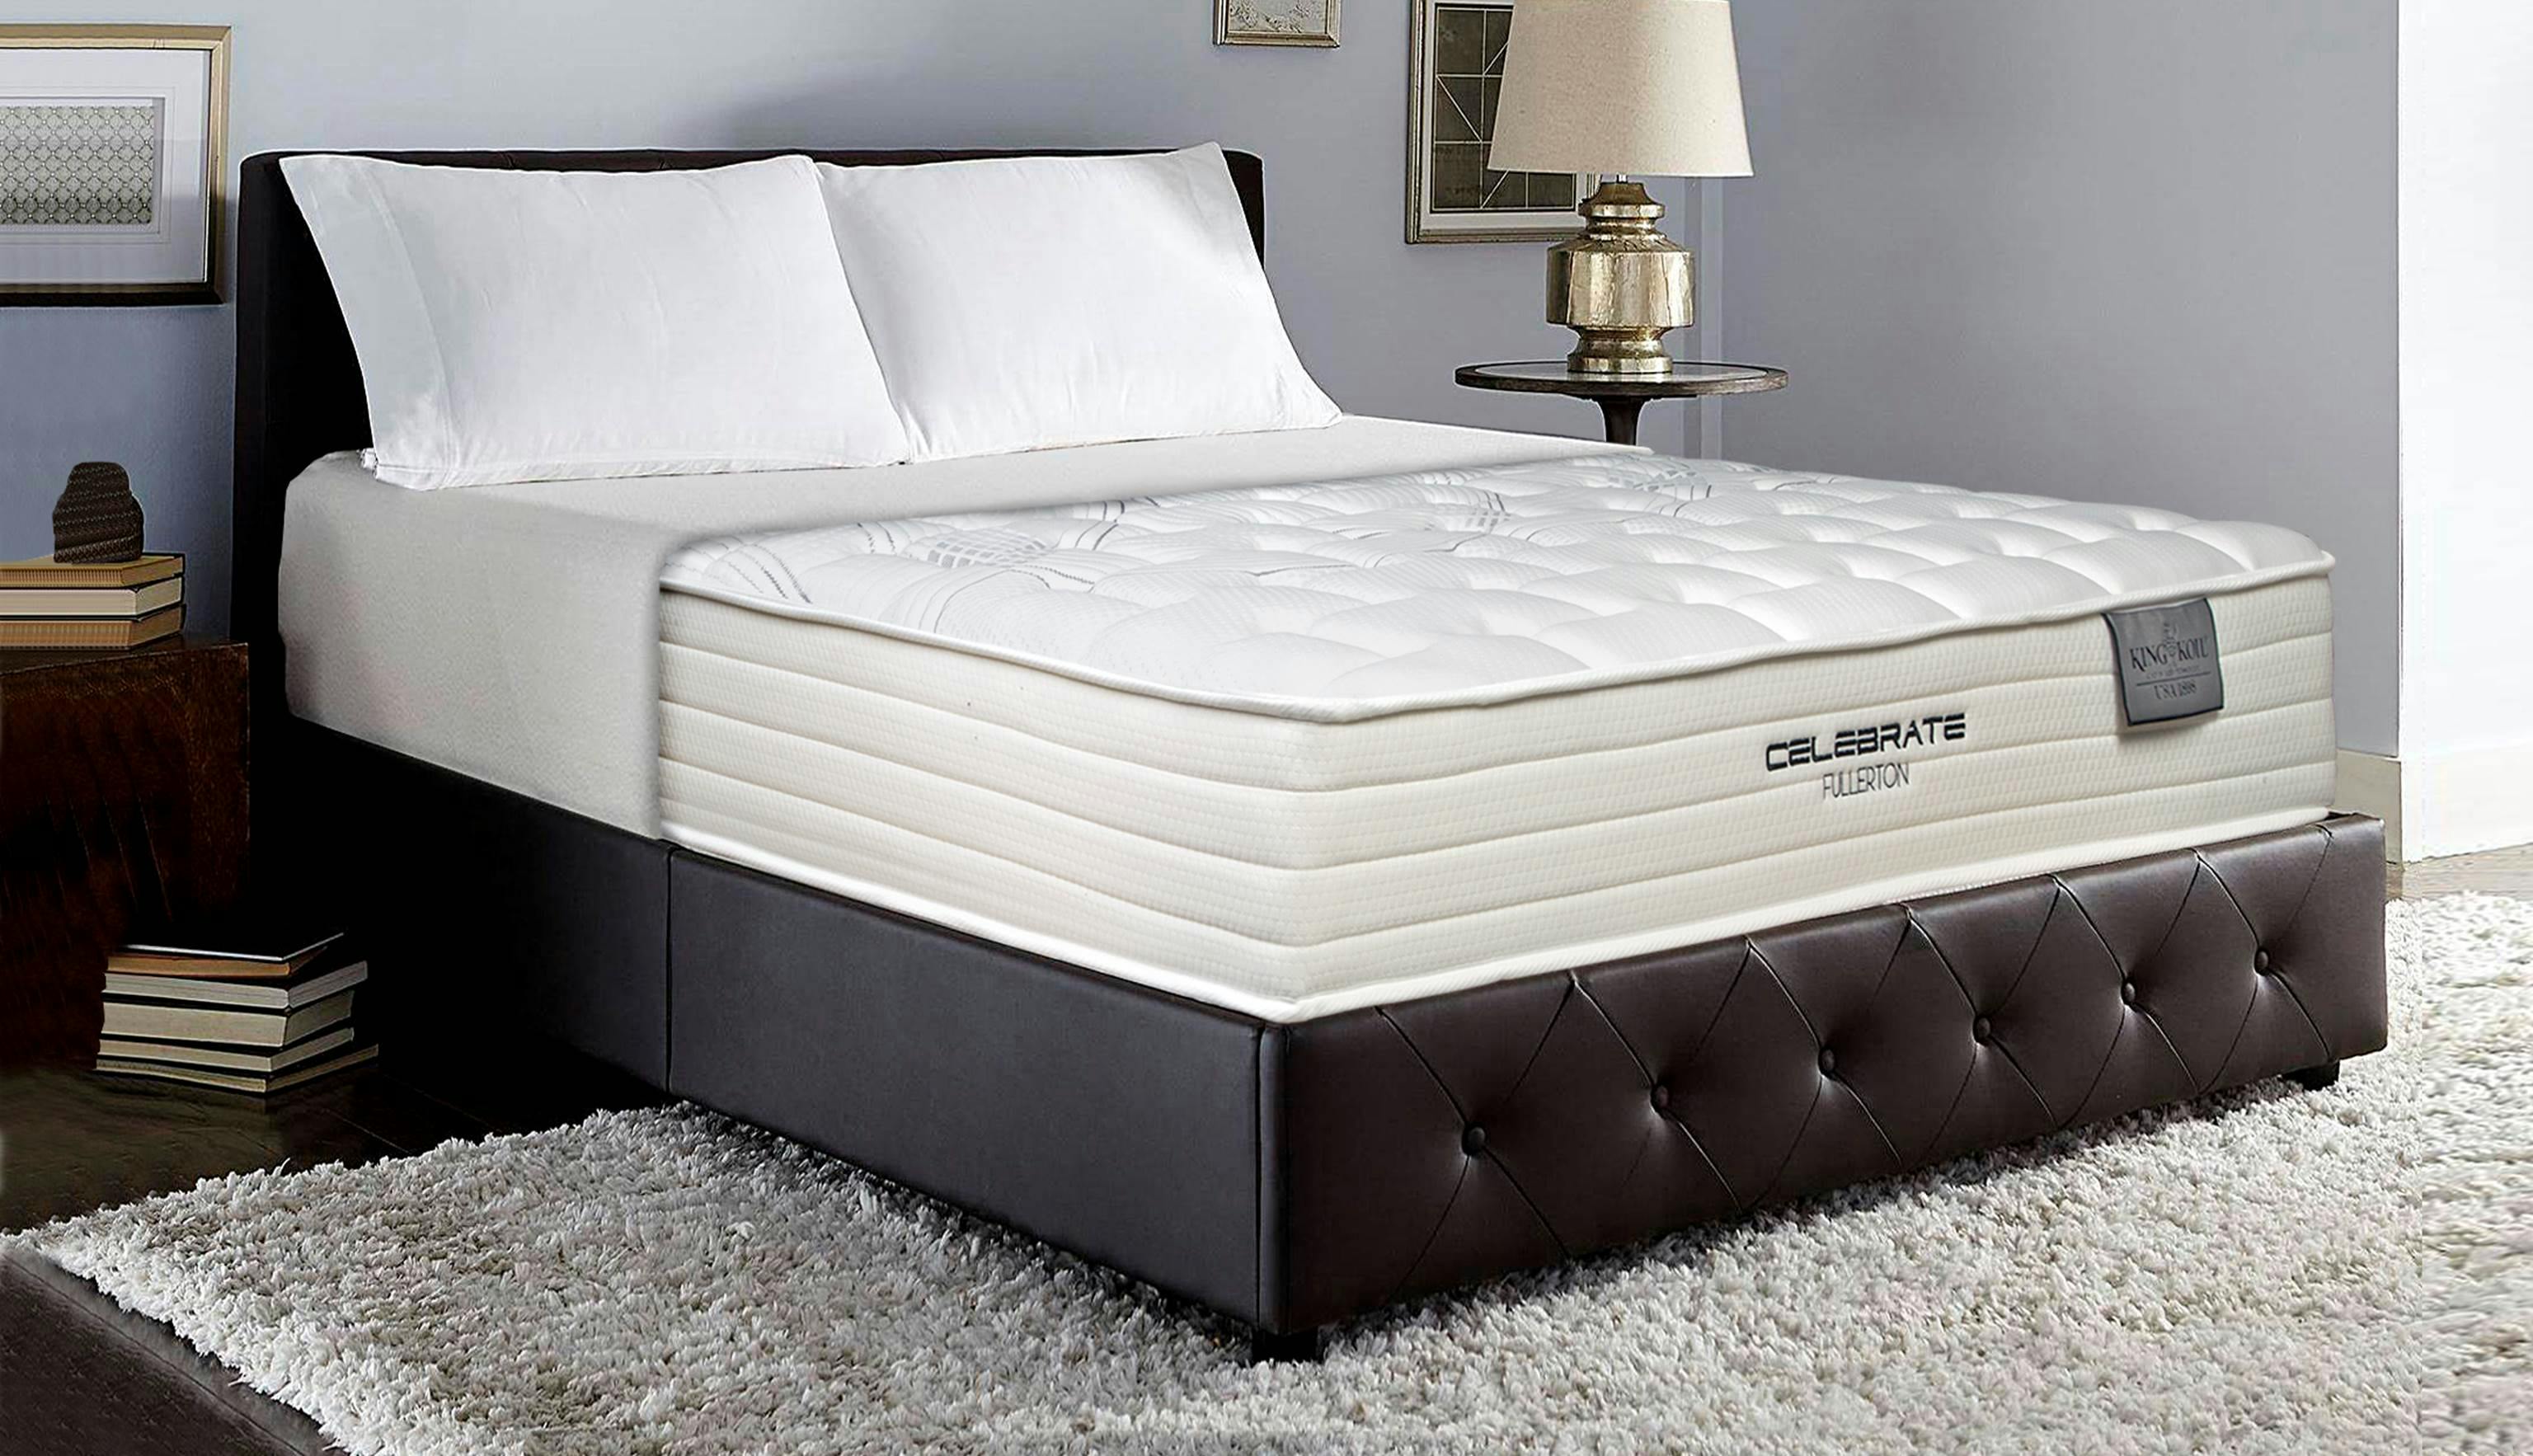 king size latex mattress for sale